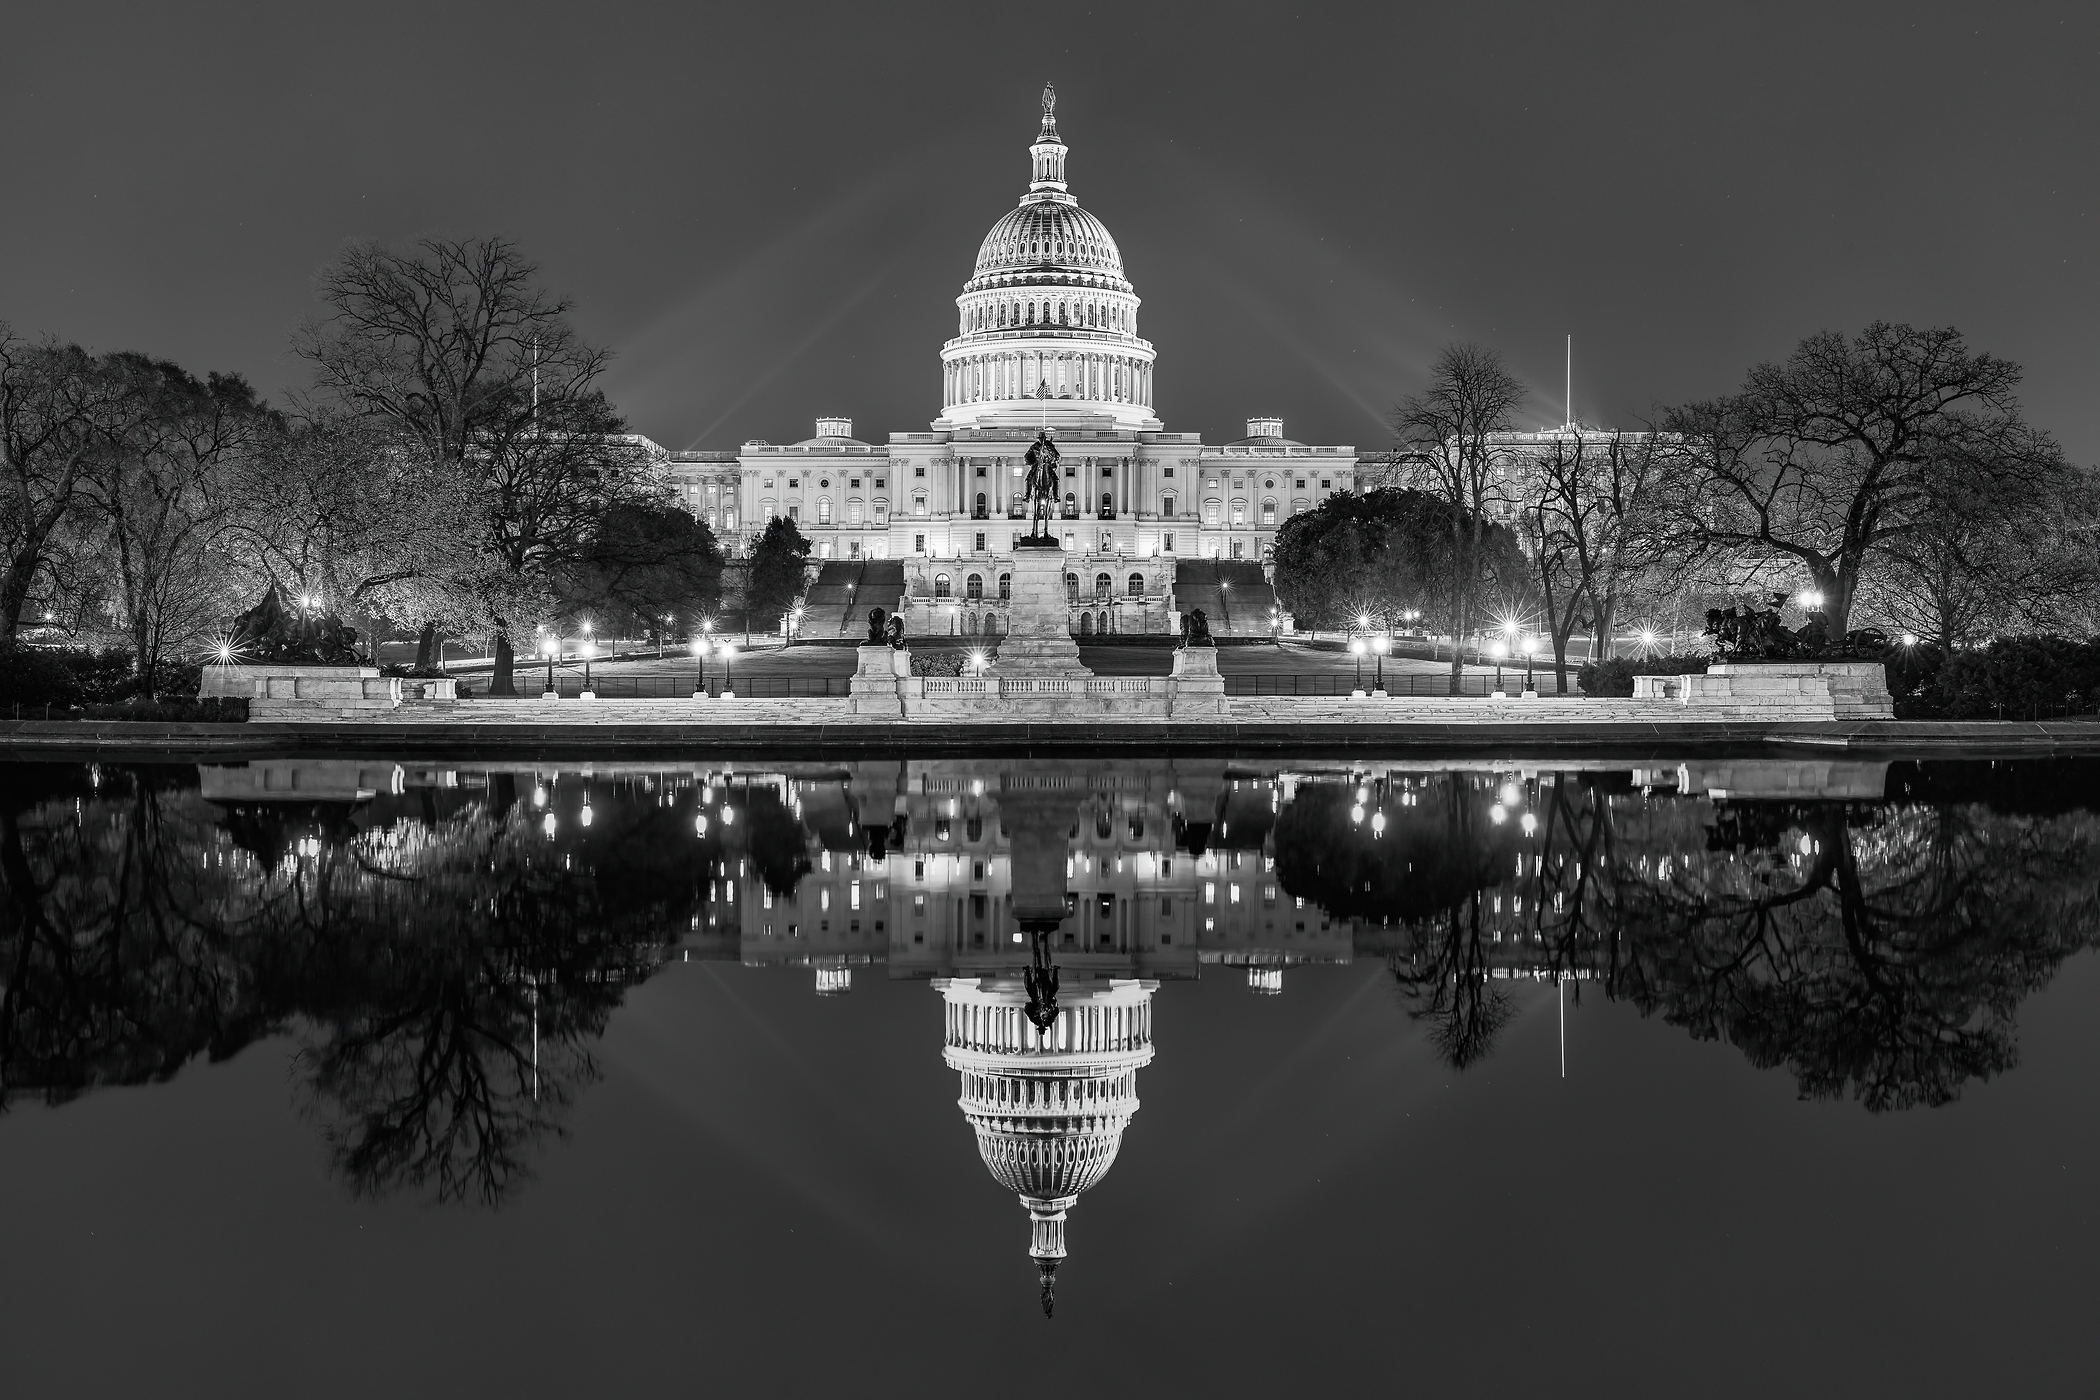 816 megapixels! A very high resolution, large-format black & white photo print of the U.S. Capitol Building; fine art photograph created by Tim Lo Monaco on the United States Capitol Grounds, Washington, D.C.